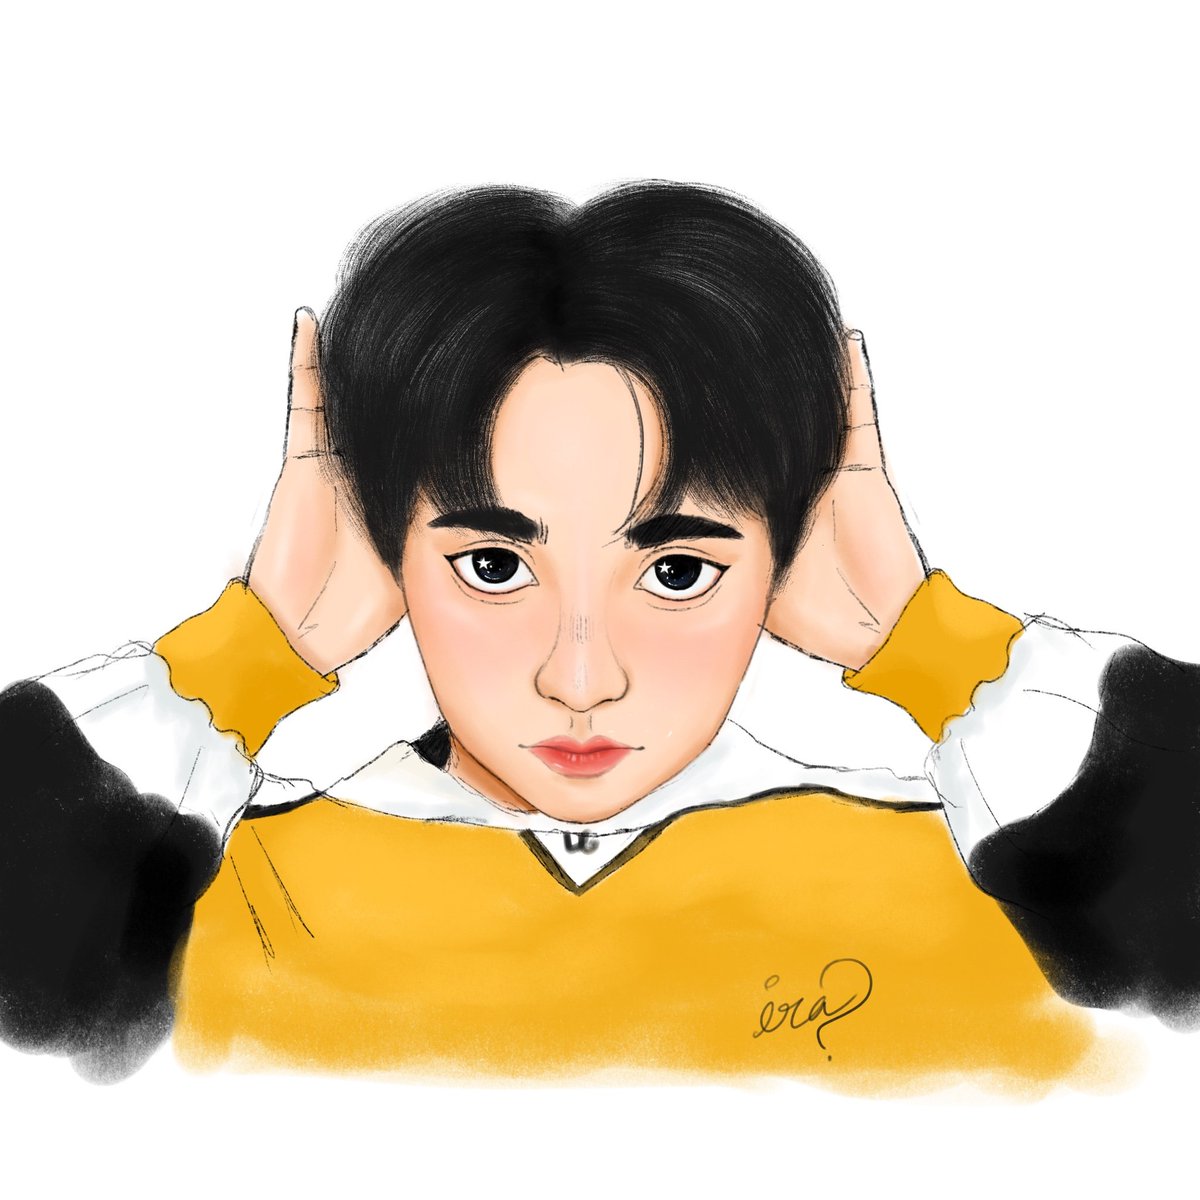 Drawing someone other than a children's book character after ages...
Stream Let me in cause the last part is my favourite 
#EXO_HearMeOut #EXO_EXIST #EXO_TeaserImage1